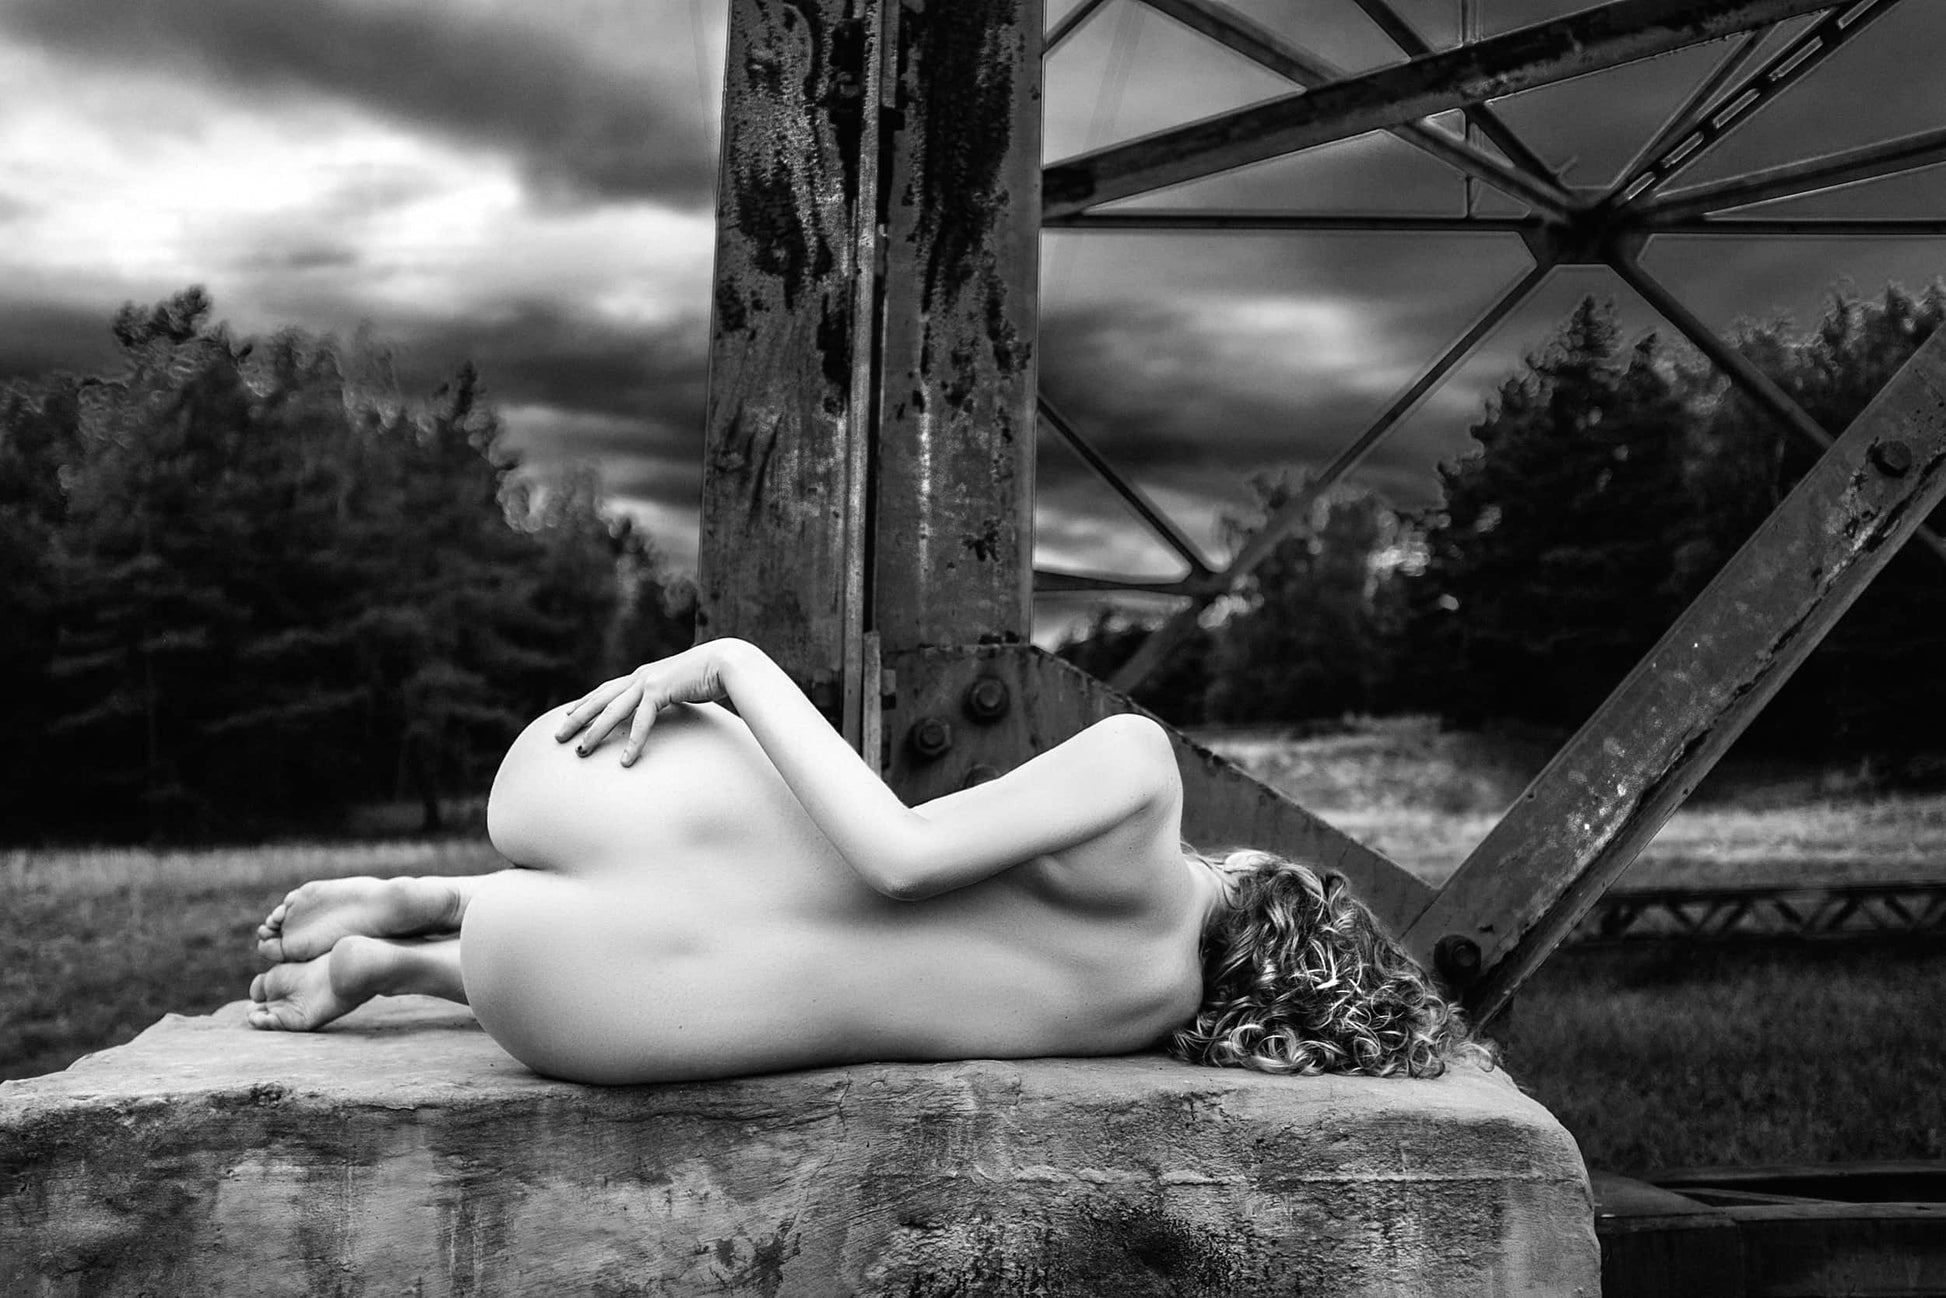 Fine artwork of a nude woman curled up on a concrete base of an electric transmission tower, with the tower's steel legs looming behind, captured by Ruslan Bolgov.